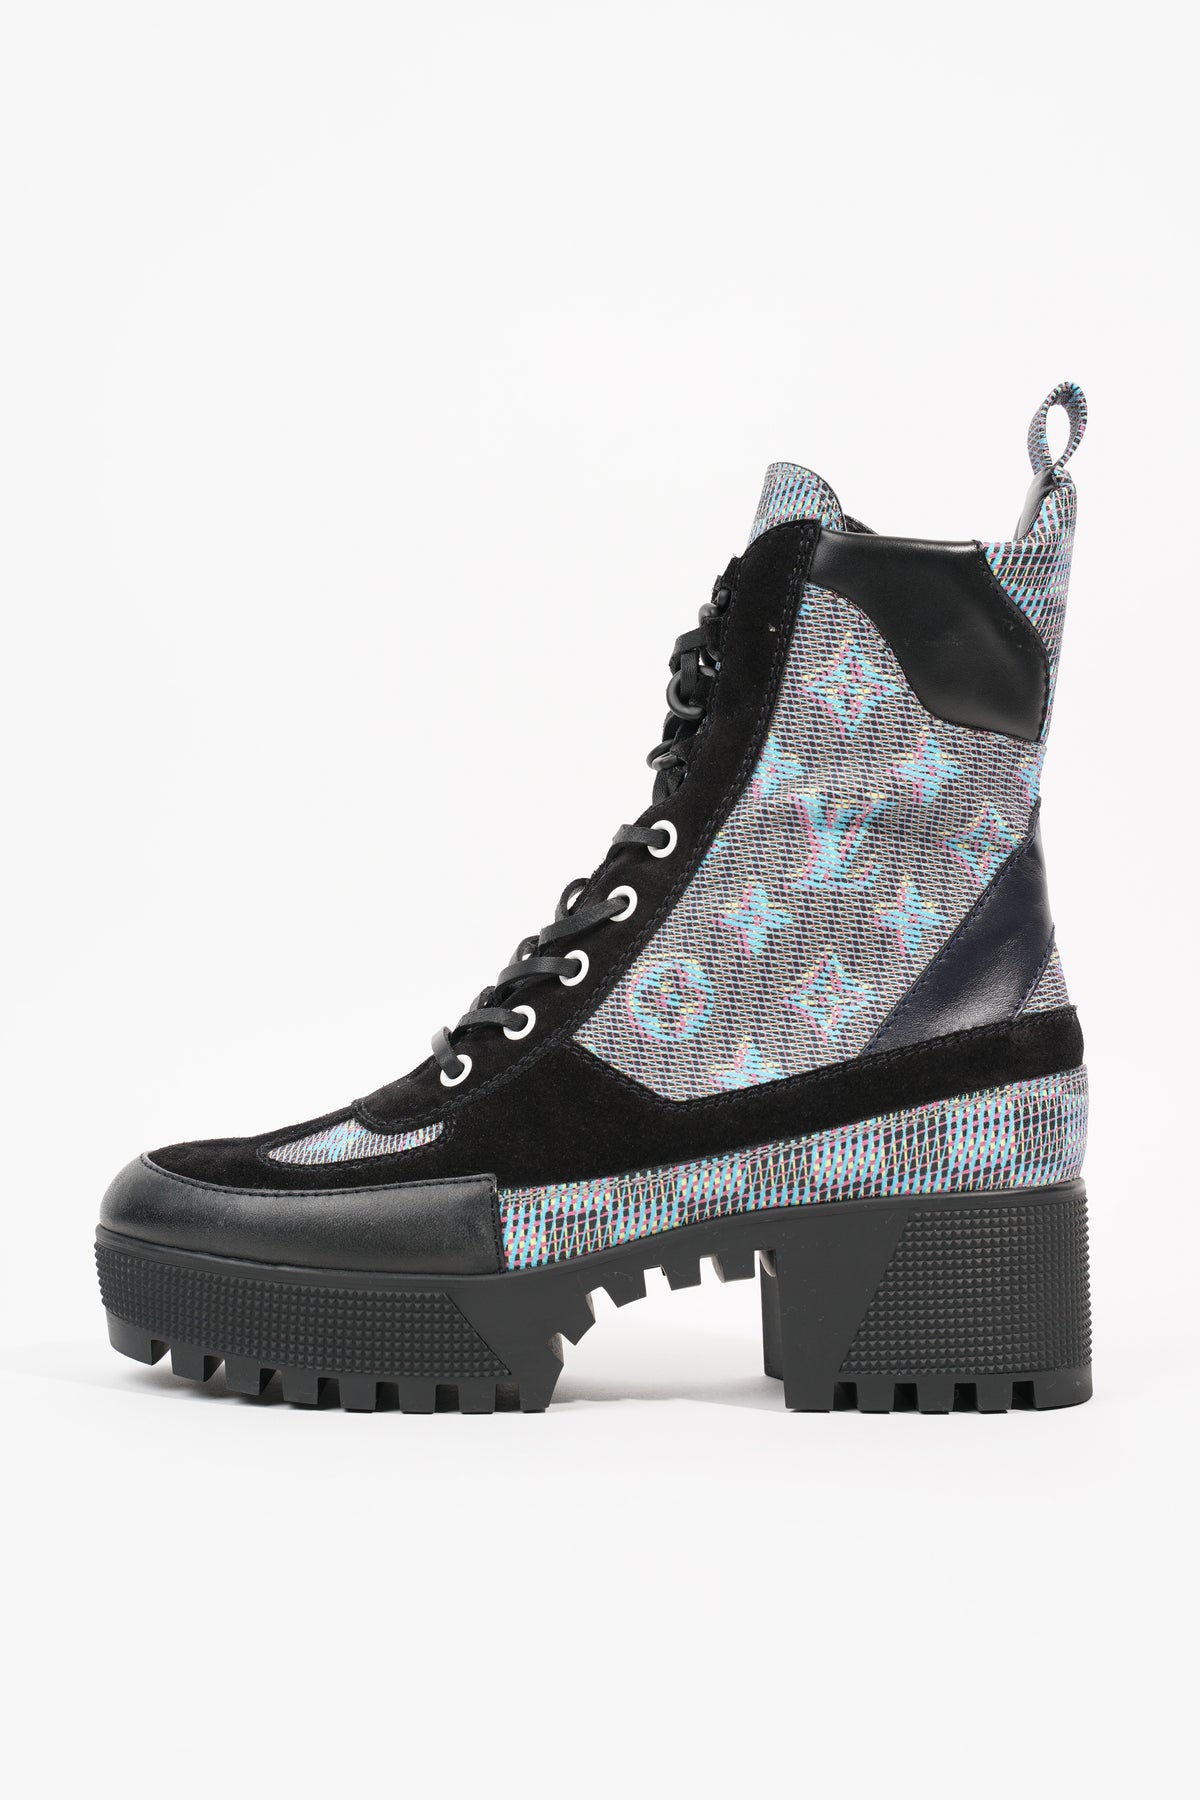 LV Beaubourg Ankle Boot in Black - Shoes 1A8949, LOUIS VUITTON ®